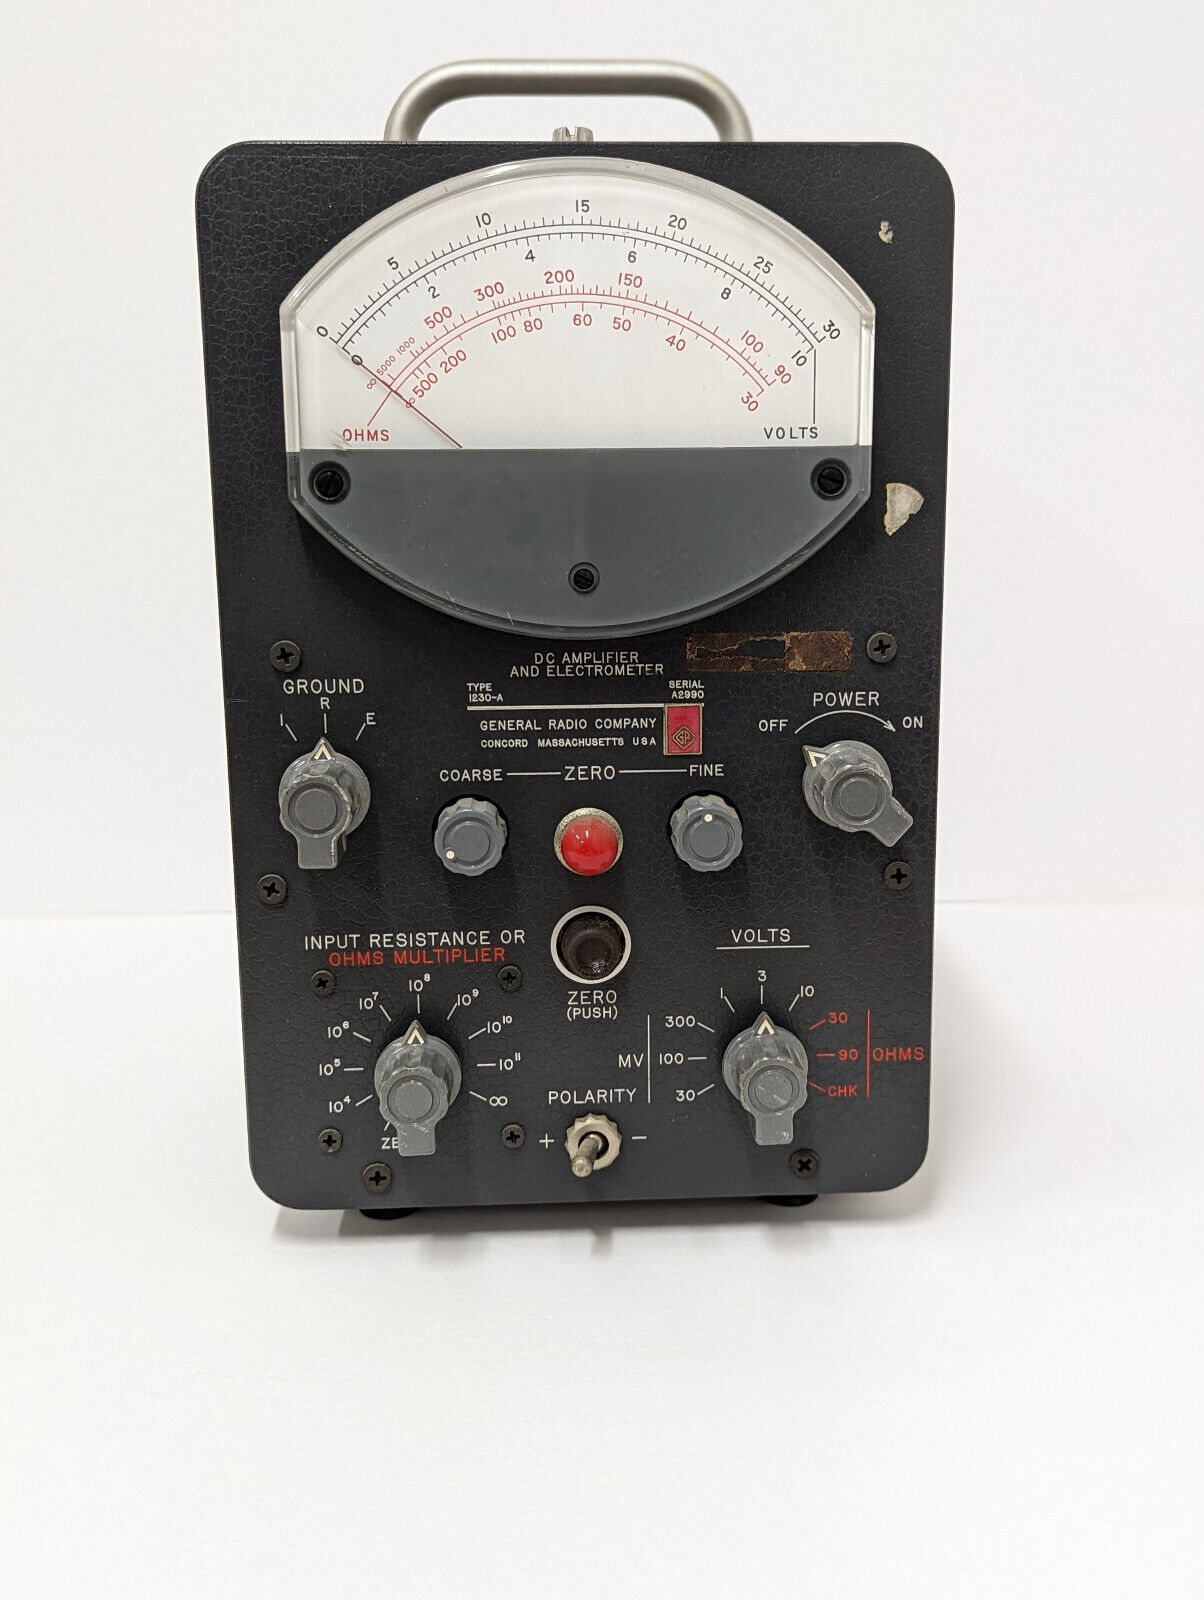 General Radio Co. Type 1230-A DC Amplifier and Electrometer